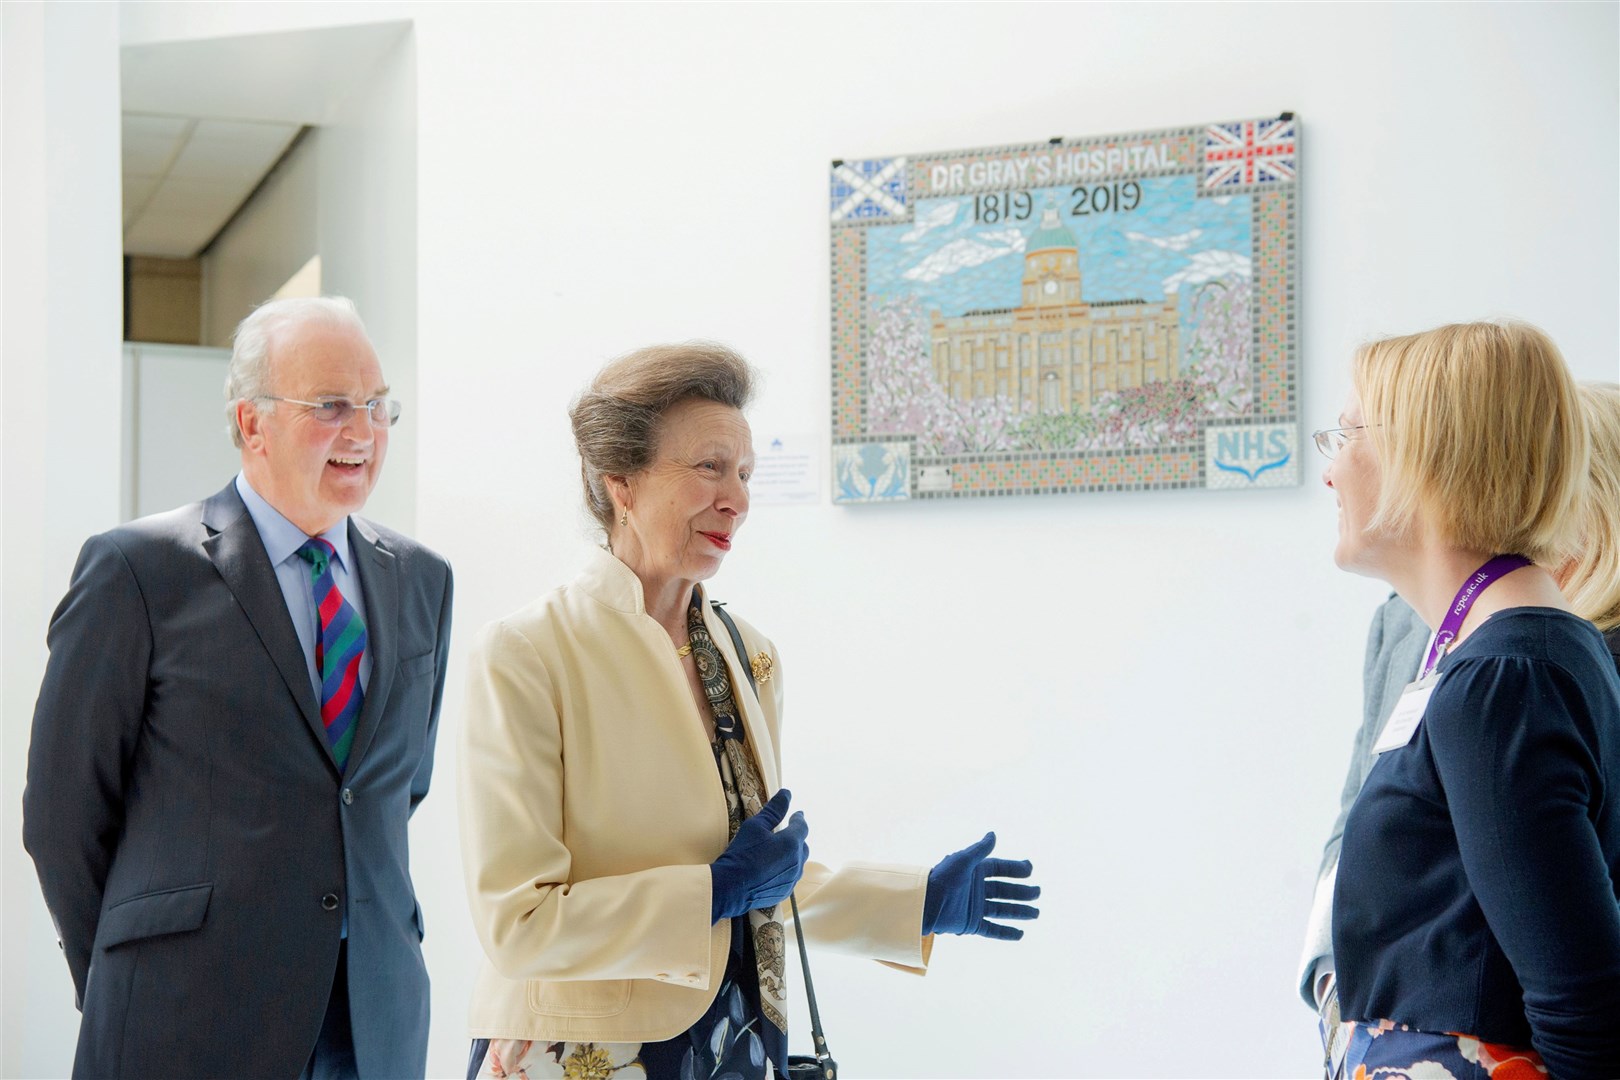 The Princess Royal unveils the anniversary Mosaic during her visit to Dr Gray's Hospital as part of its 200th anniversary celebrations. Picture: Daniel Forsyth.